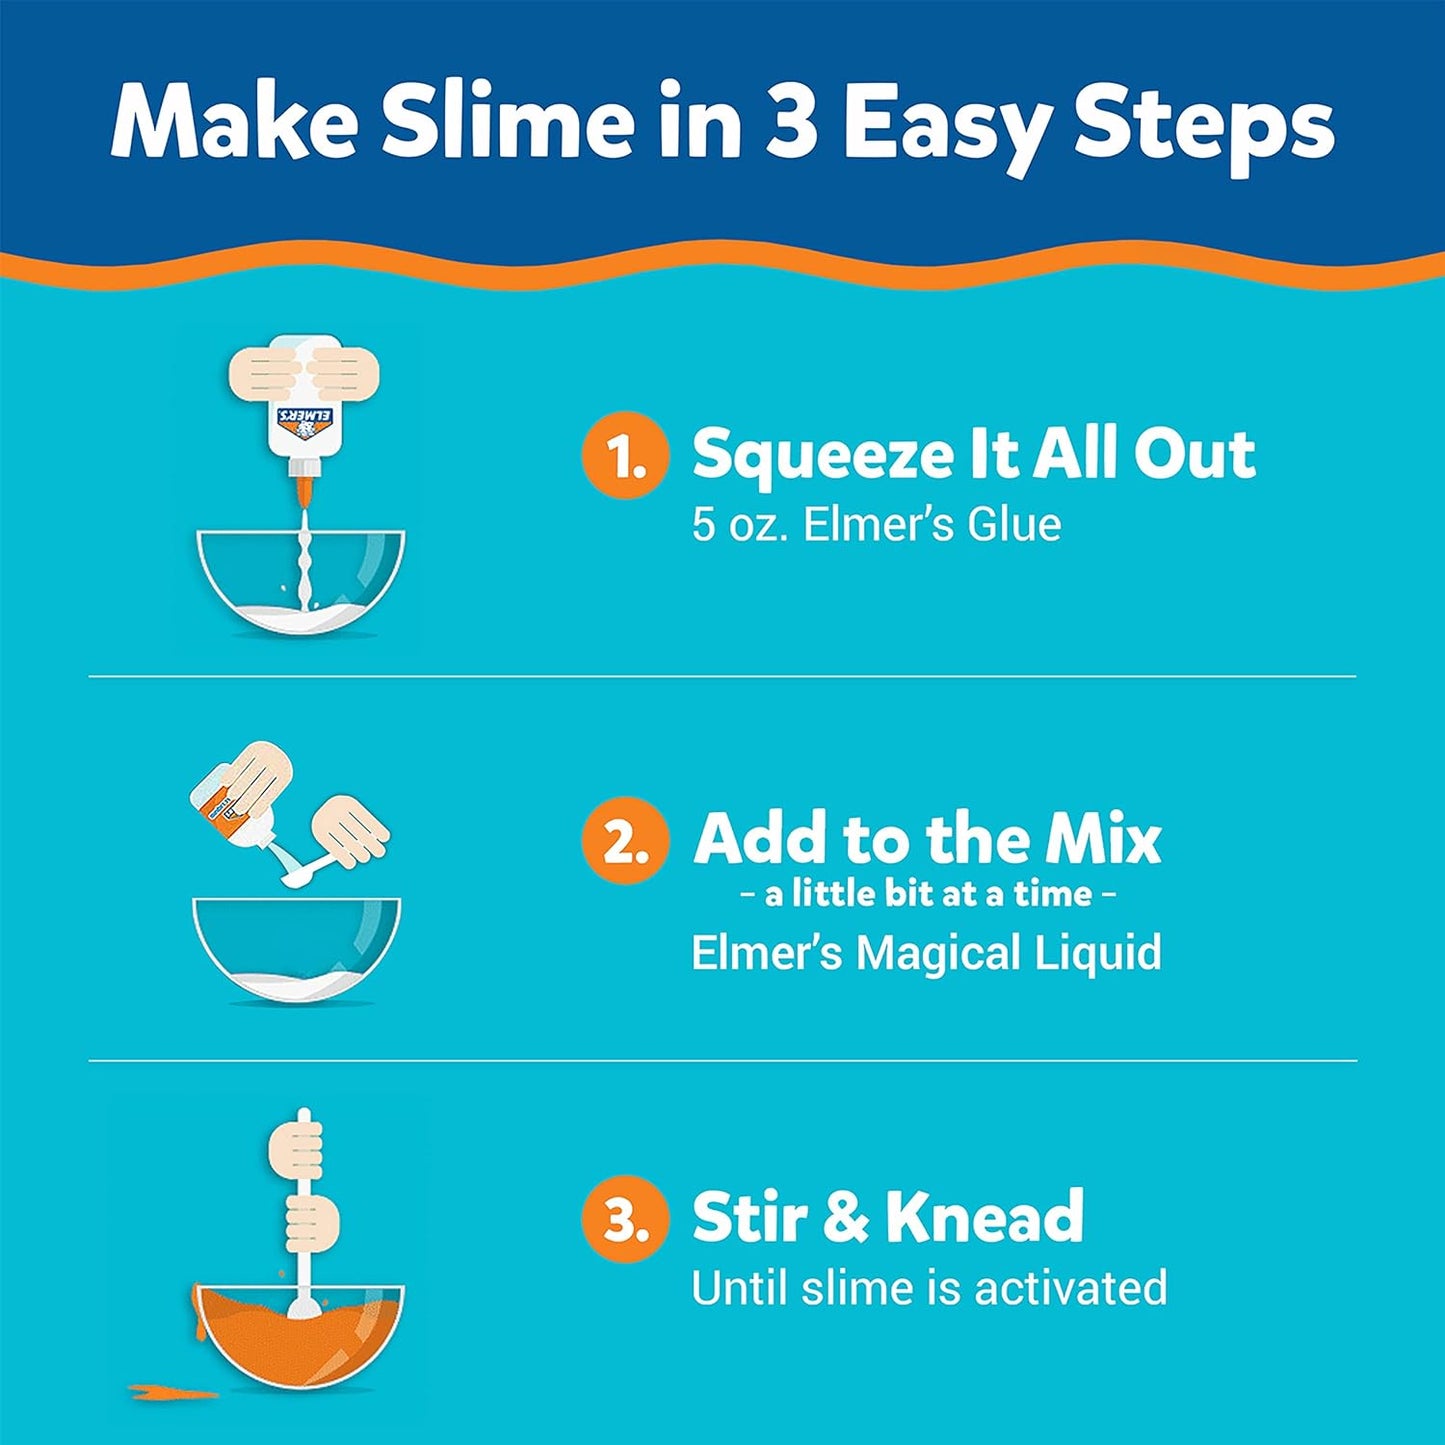 Elmer’S All-Star Slime Kit, Includes Liquid Glue, Slime Activator, and Premade Slime, 9 Count